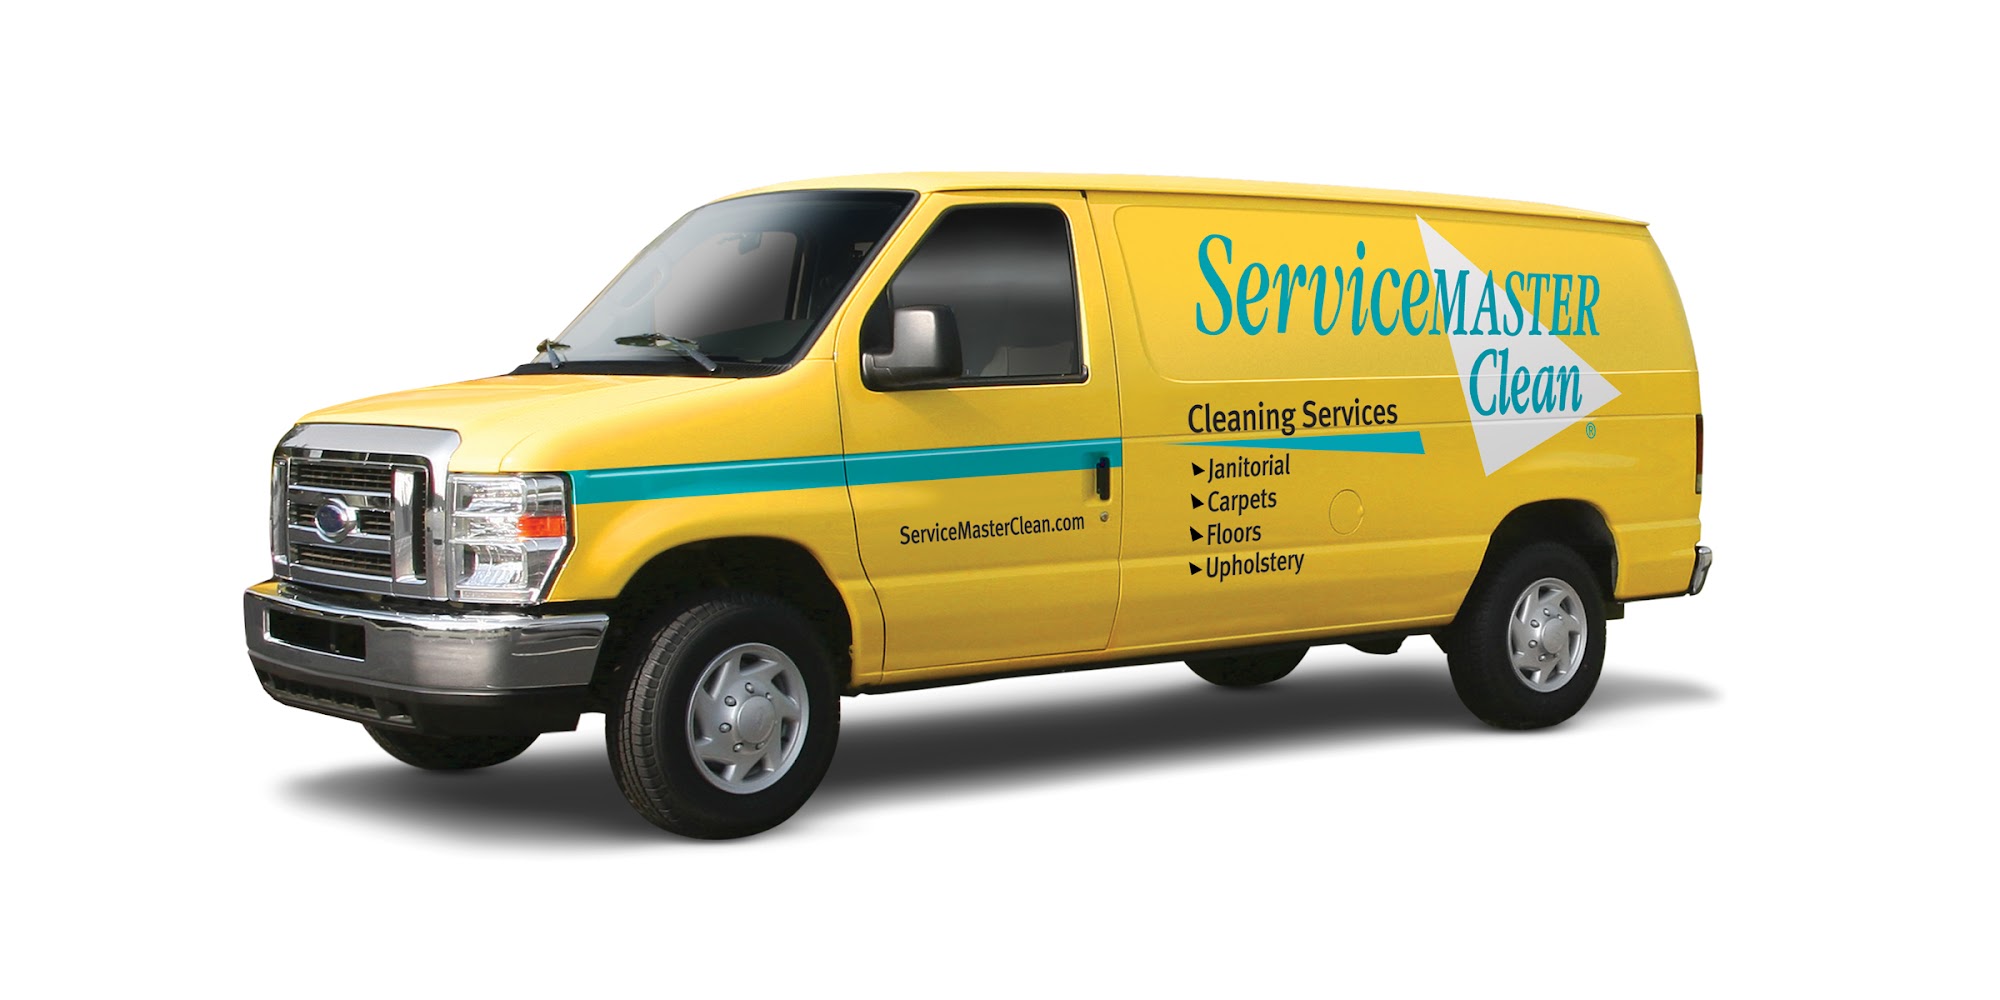 ServiceMaster Commercial Building Cleaning